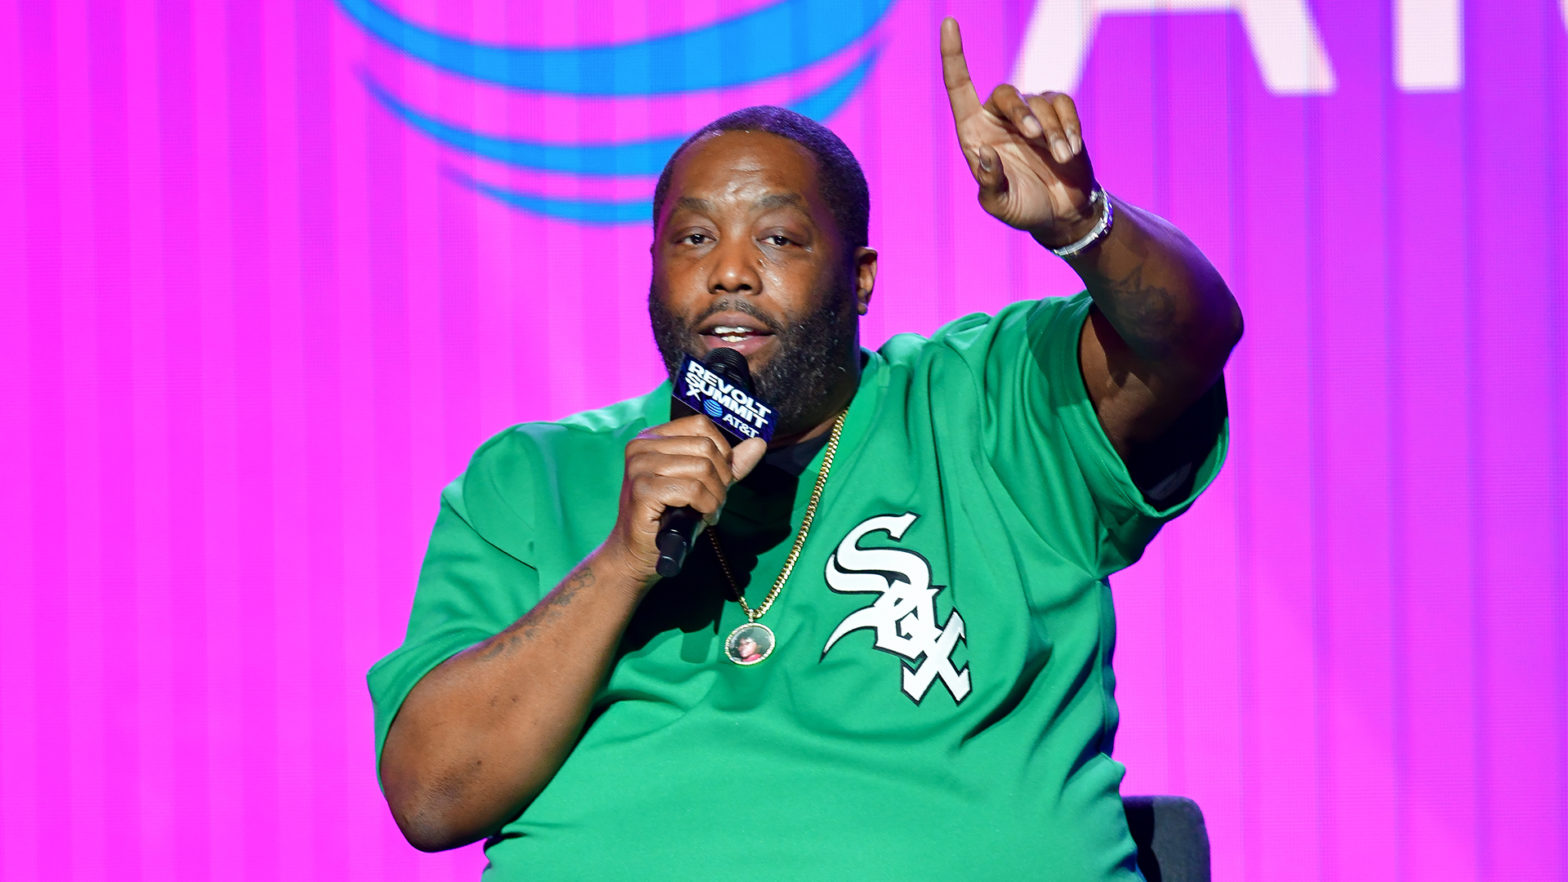 Grammy Award-Winning Artist Killer Mike Inks Publishing Deal That Includes 'Entire Catalog And Future Works'